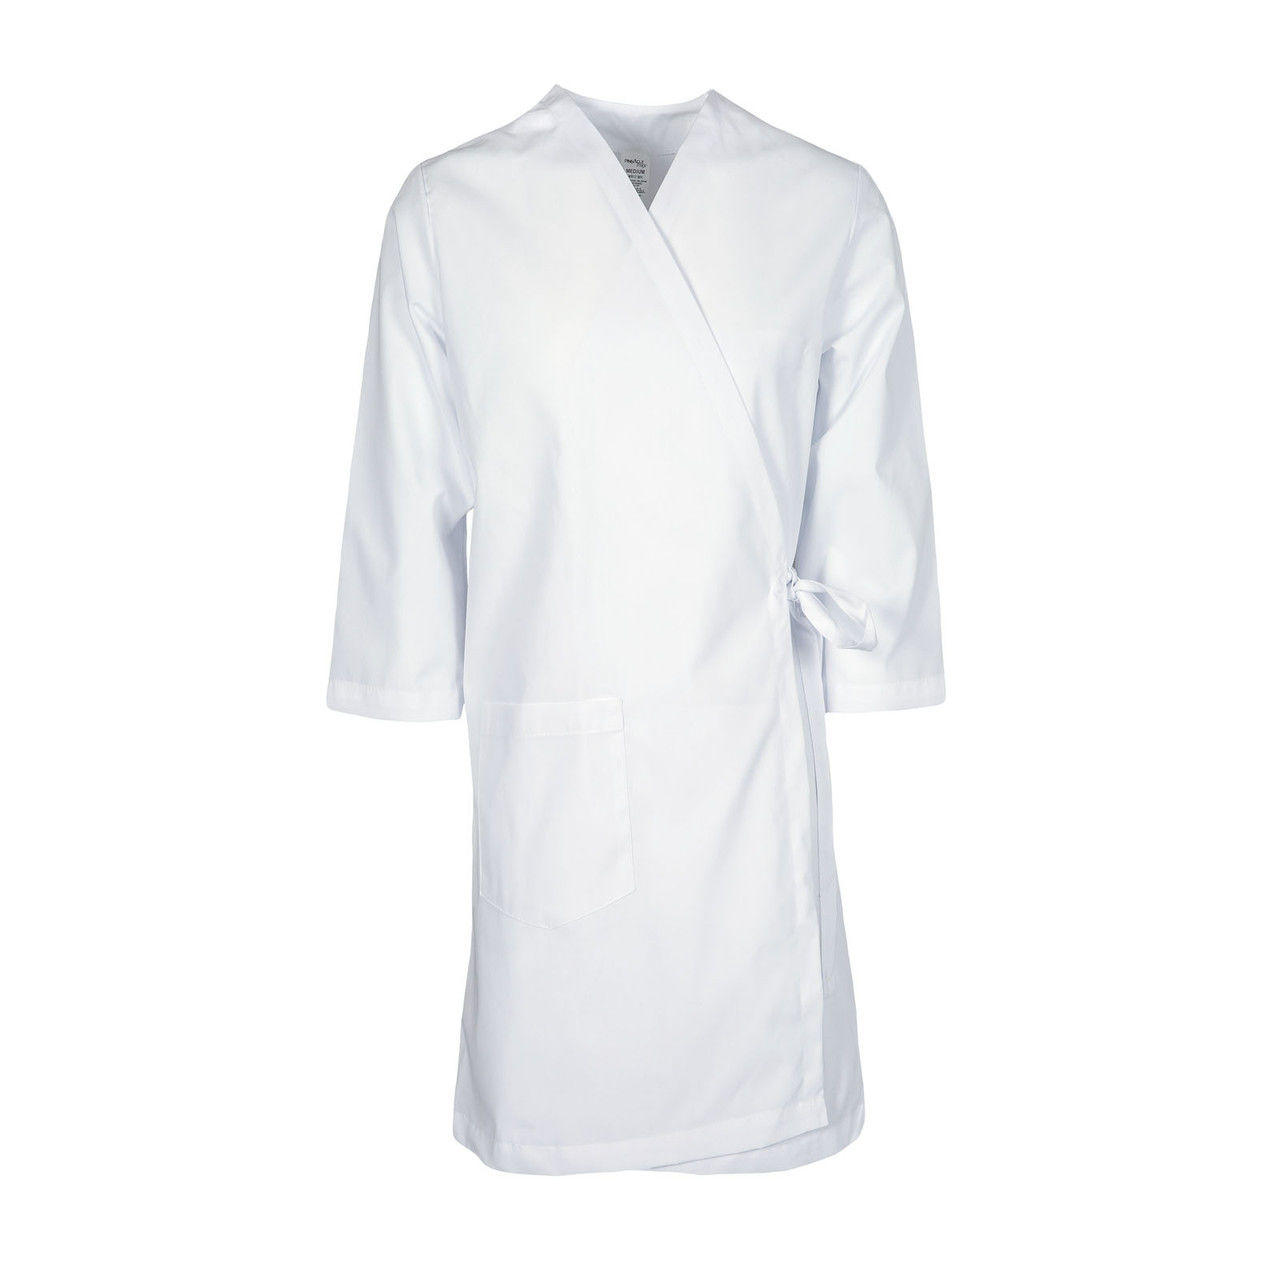 Can you specify the fabric of the white, 3-pocket smock gown?